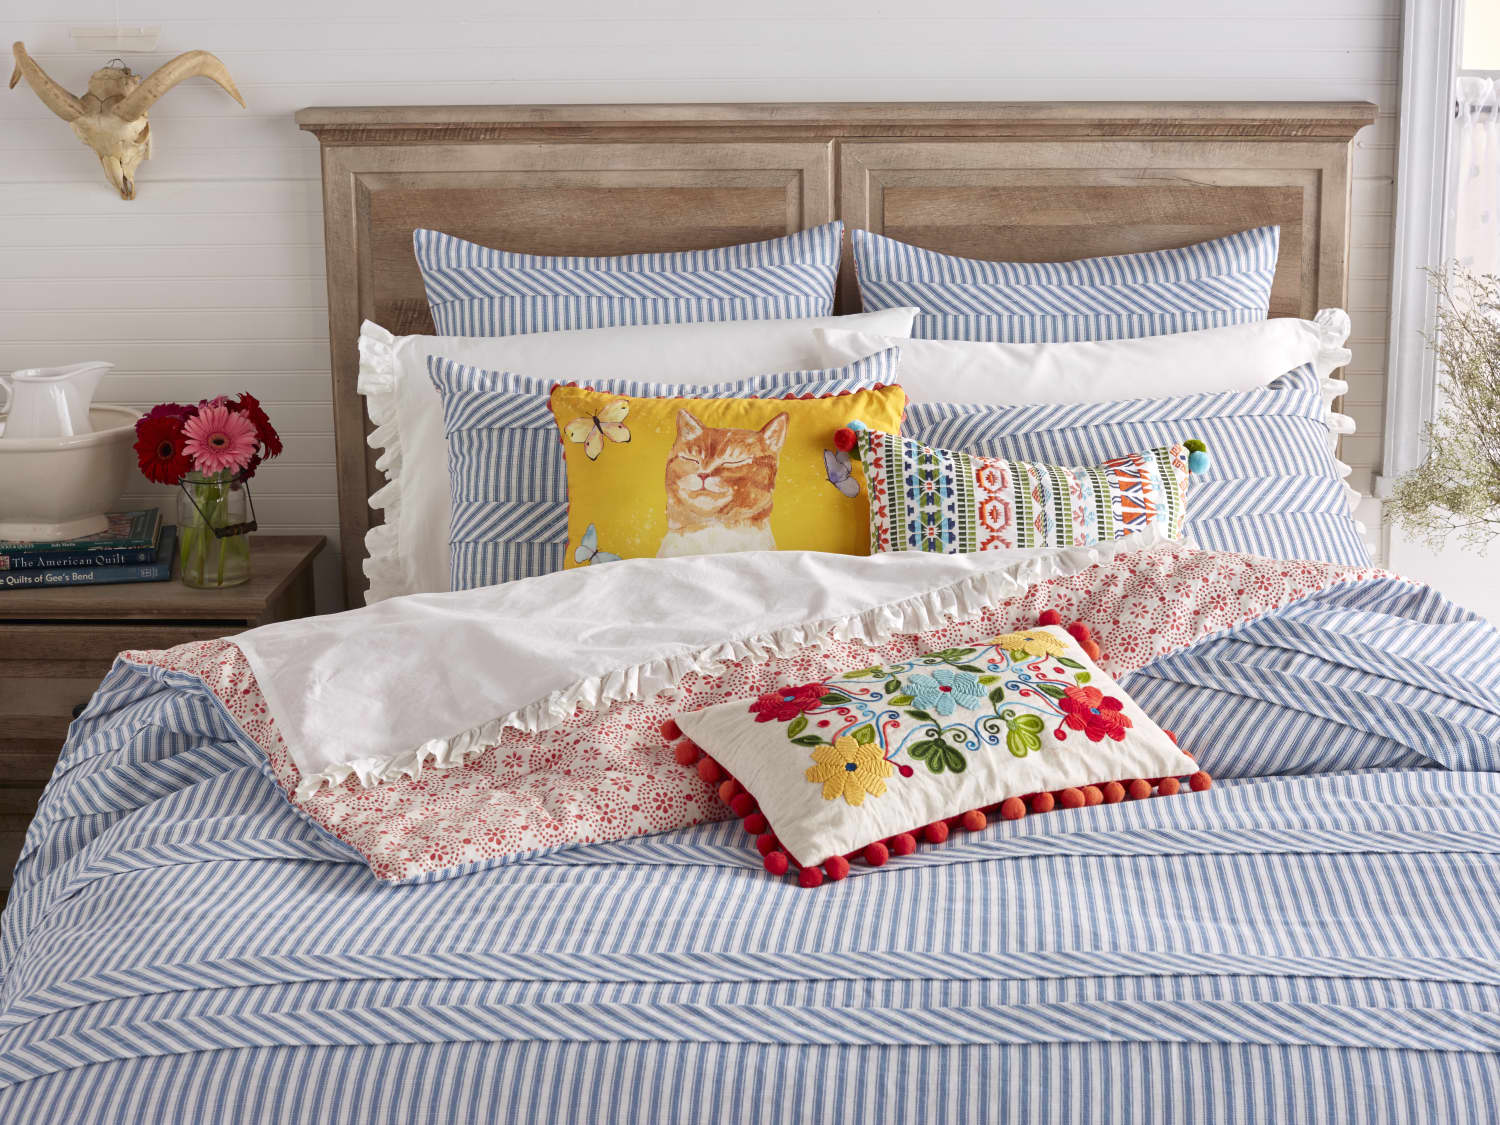 Pioneer Woman Ree Drummond Talks About Her New Bed And Bath Lines At Walmart